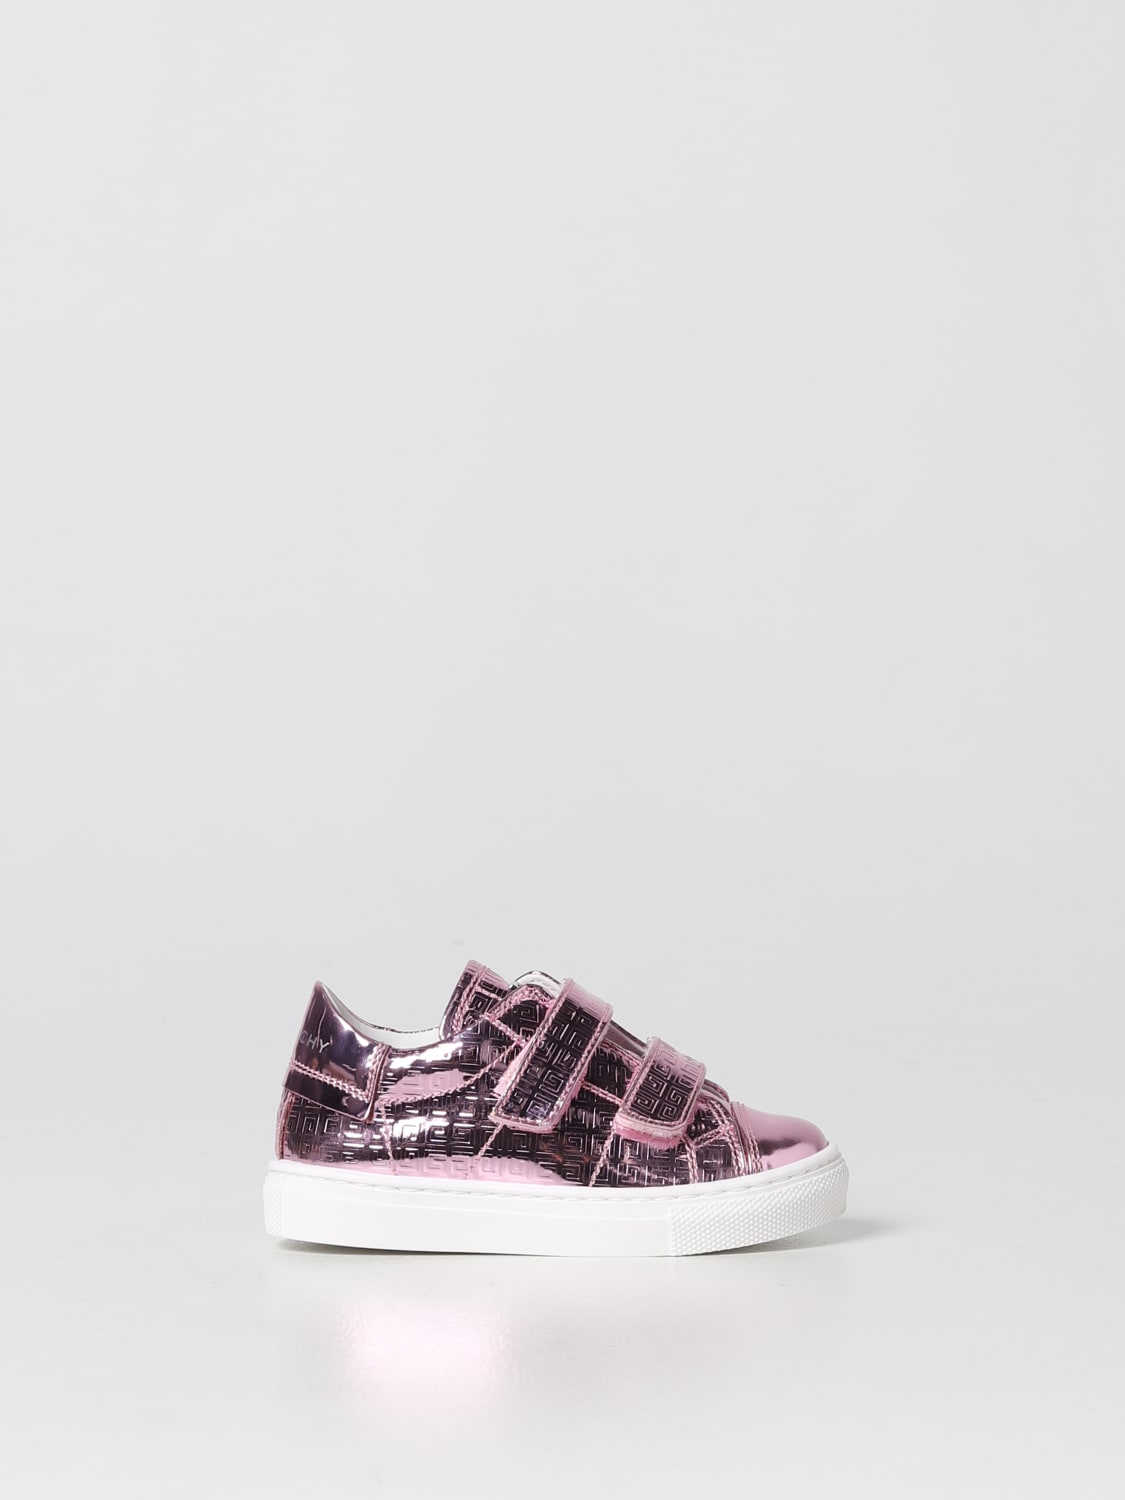 Givenchy Girls Metallic Pink Monogram Print Velcro Sneakers, Brand Size 33 (1.5 Little Kids) in Pink Washed Pink